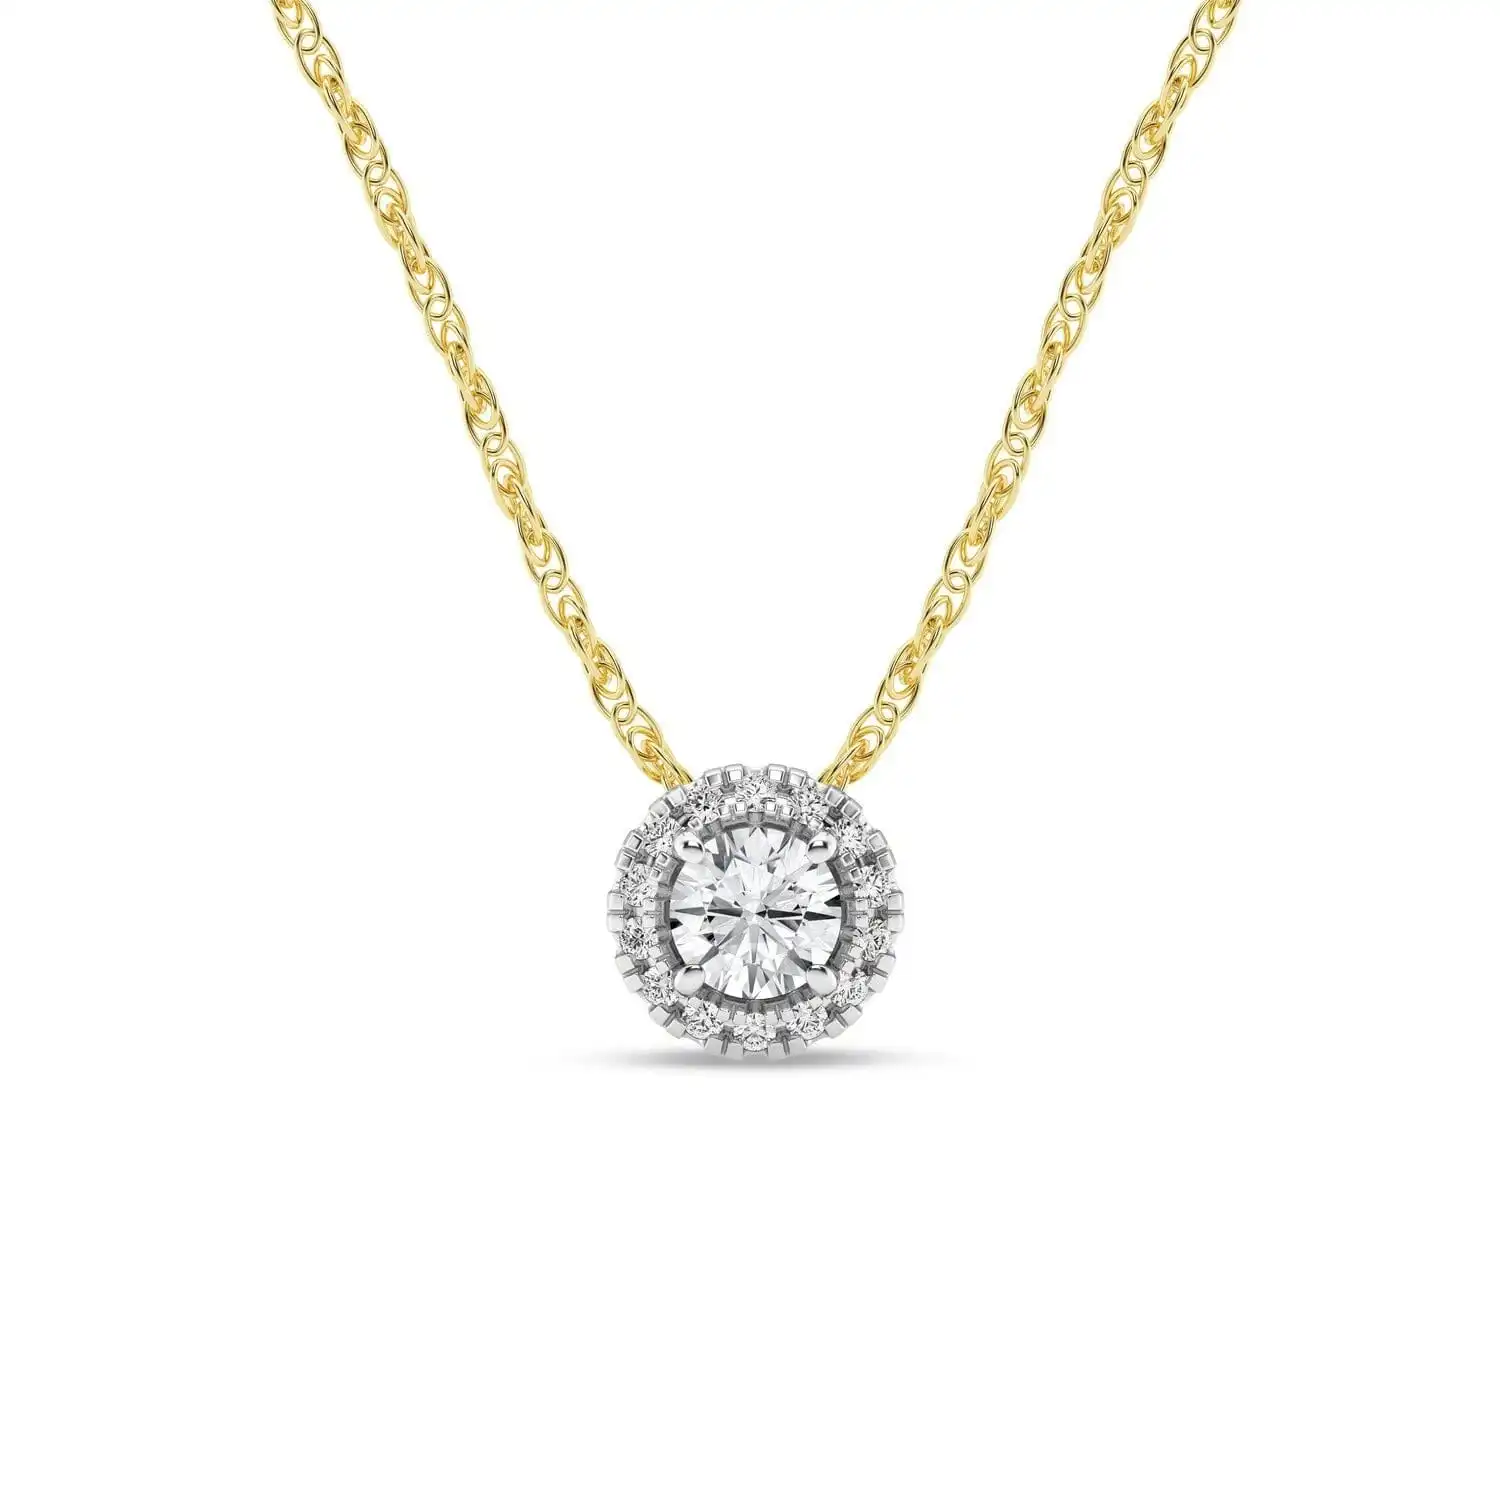 Meera Halo Solitaire Necklace with 1/4ct of Laboratory Grown Diamonds in 9ct Yellow Gold